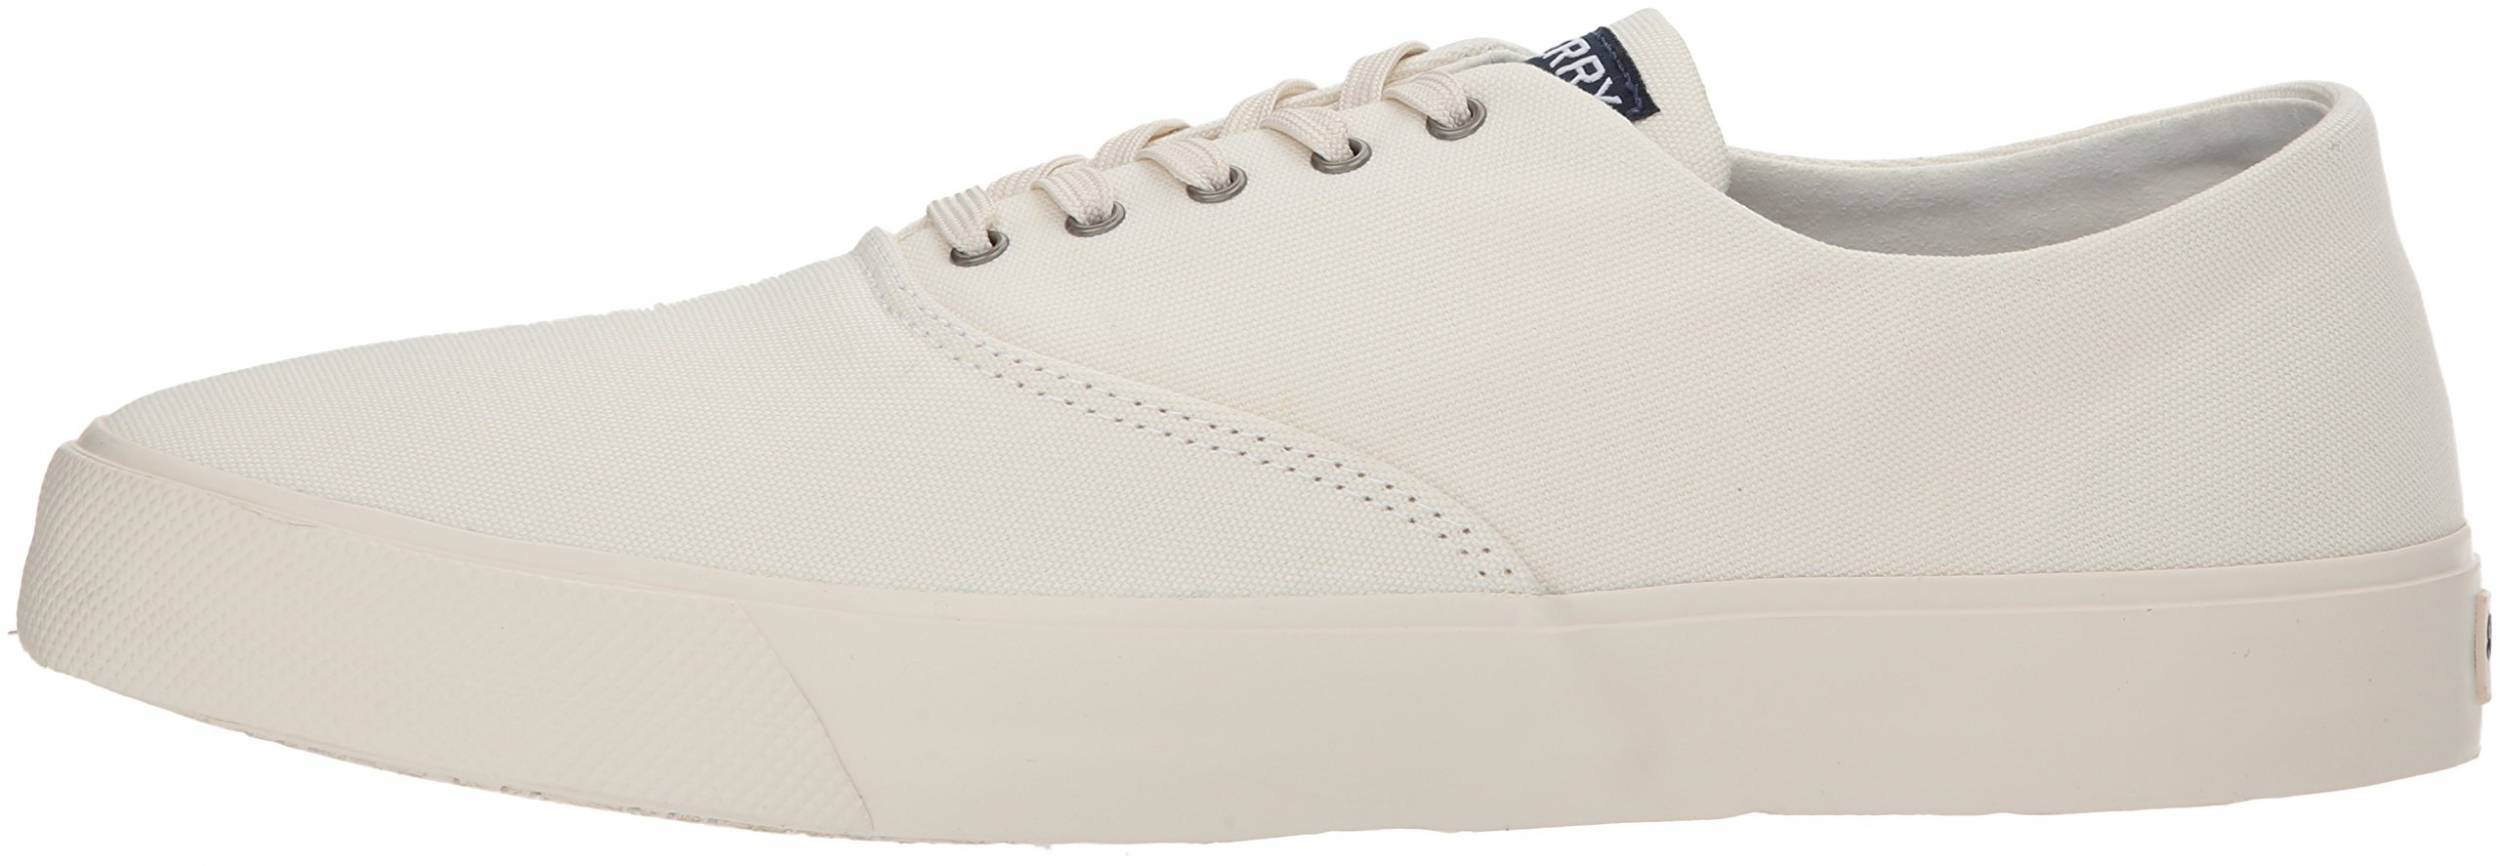 Sperry Top-Sider Captain's CVO Nautical Men's Fashion Sneakers 